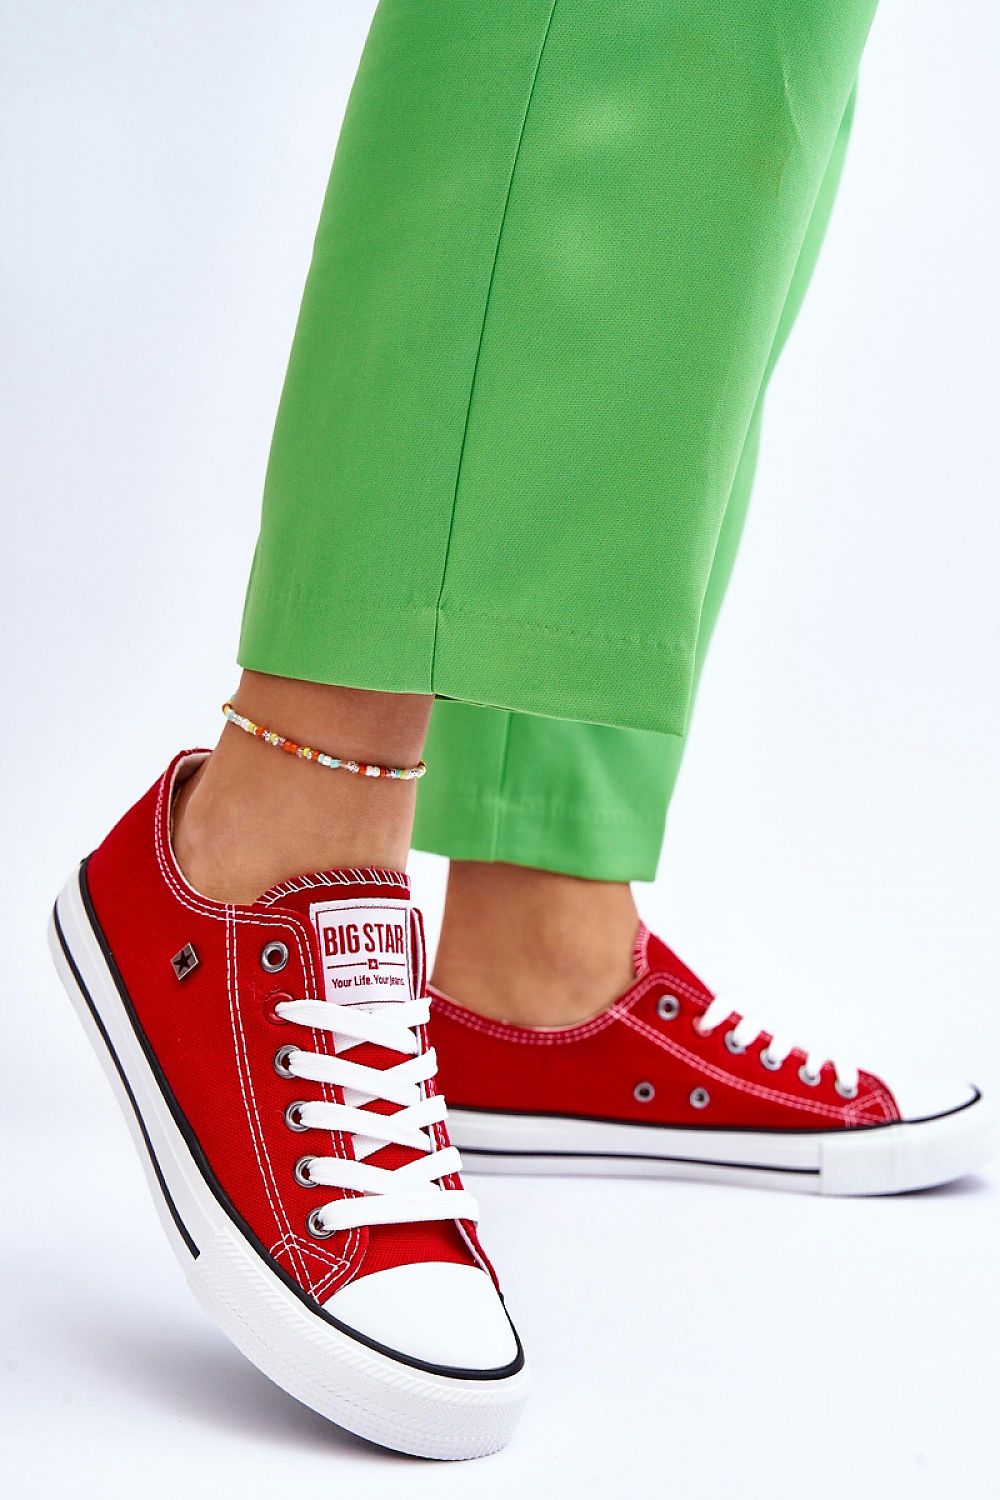 Classic Red-White Step in Style Sneakers